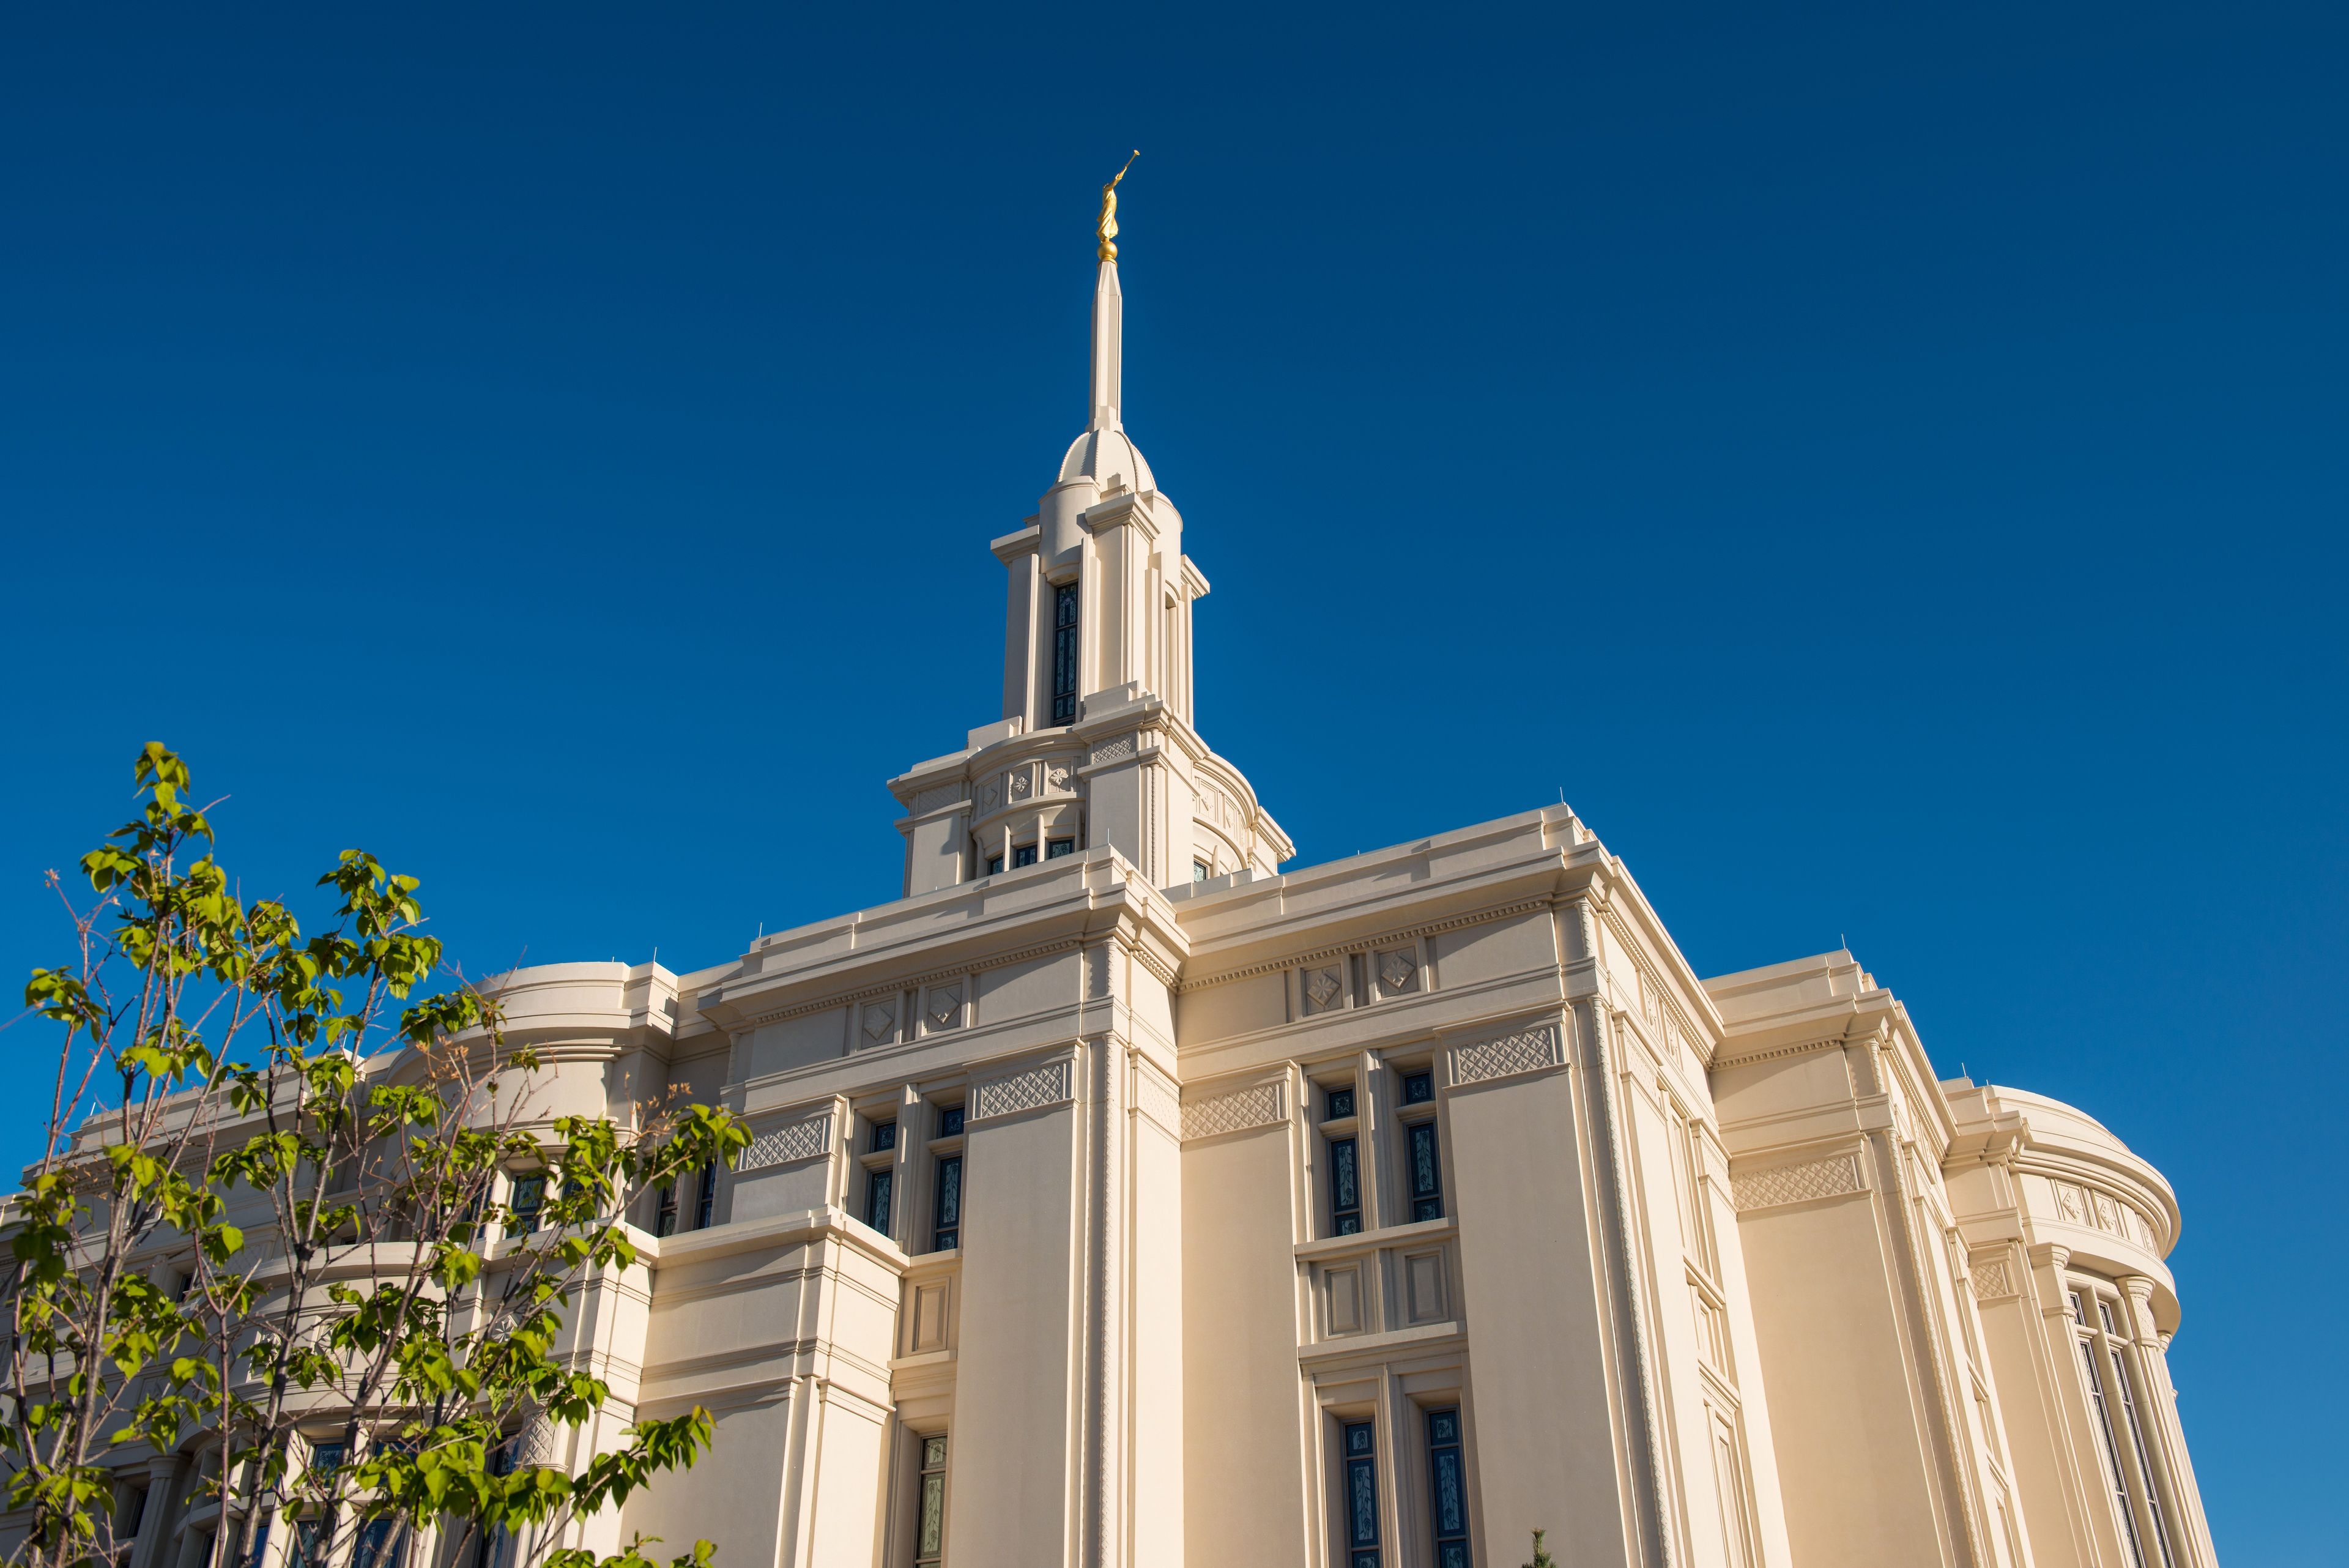 An upward view of the south side of the Payson Utah Temple during the day.